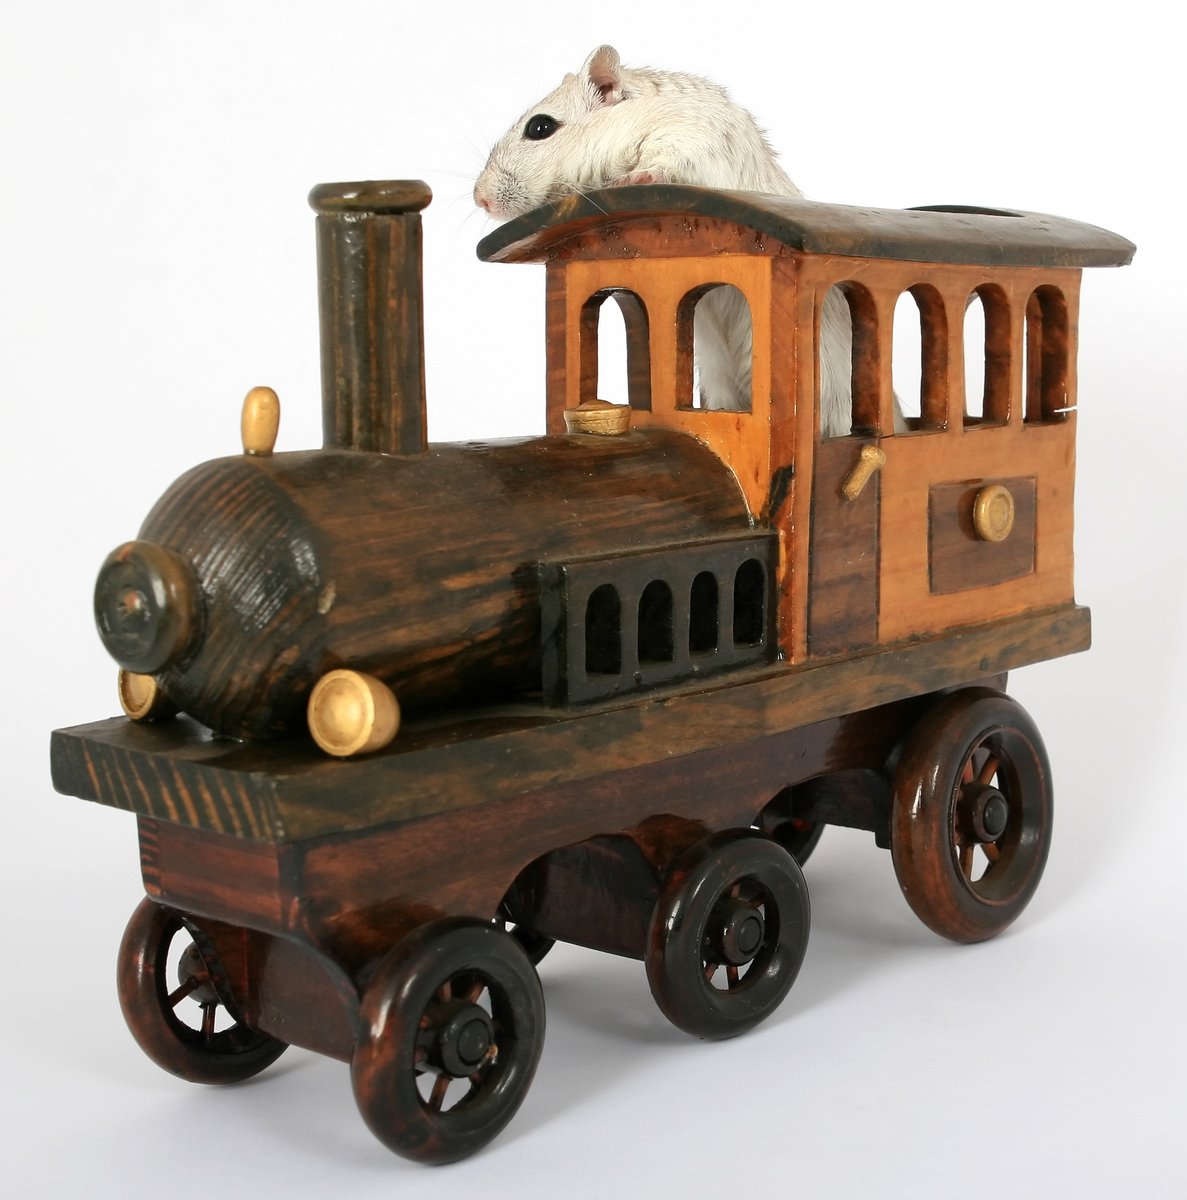 the wooden toy train is holding a teddy bear on top of it